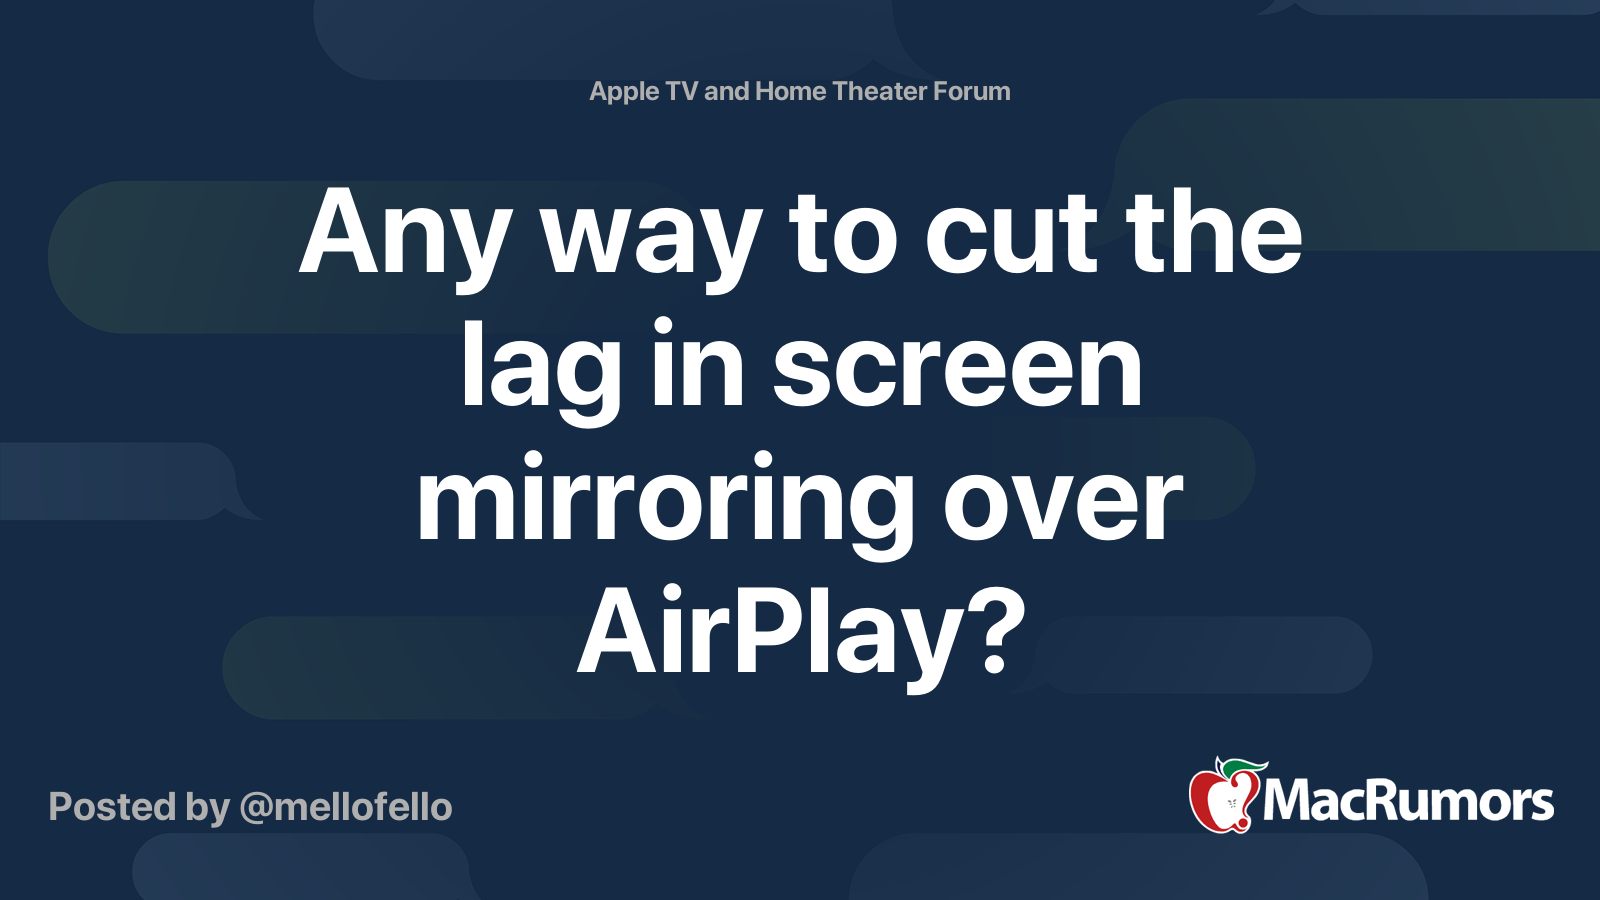 Følge efter Permanent Strømcelle Any way to cut the lag in screen mirroring over AirPlay? | MacRumors Forums